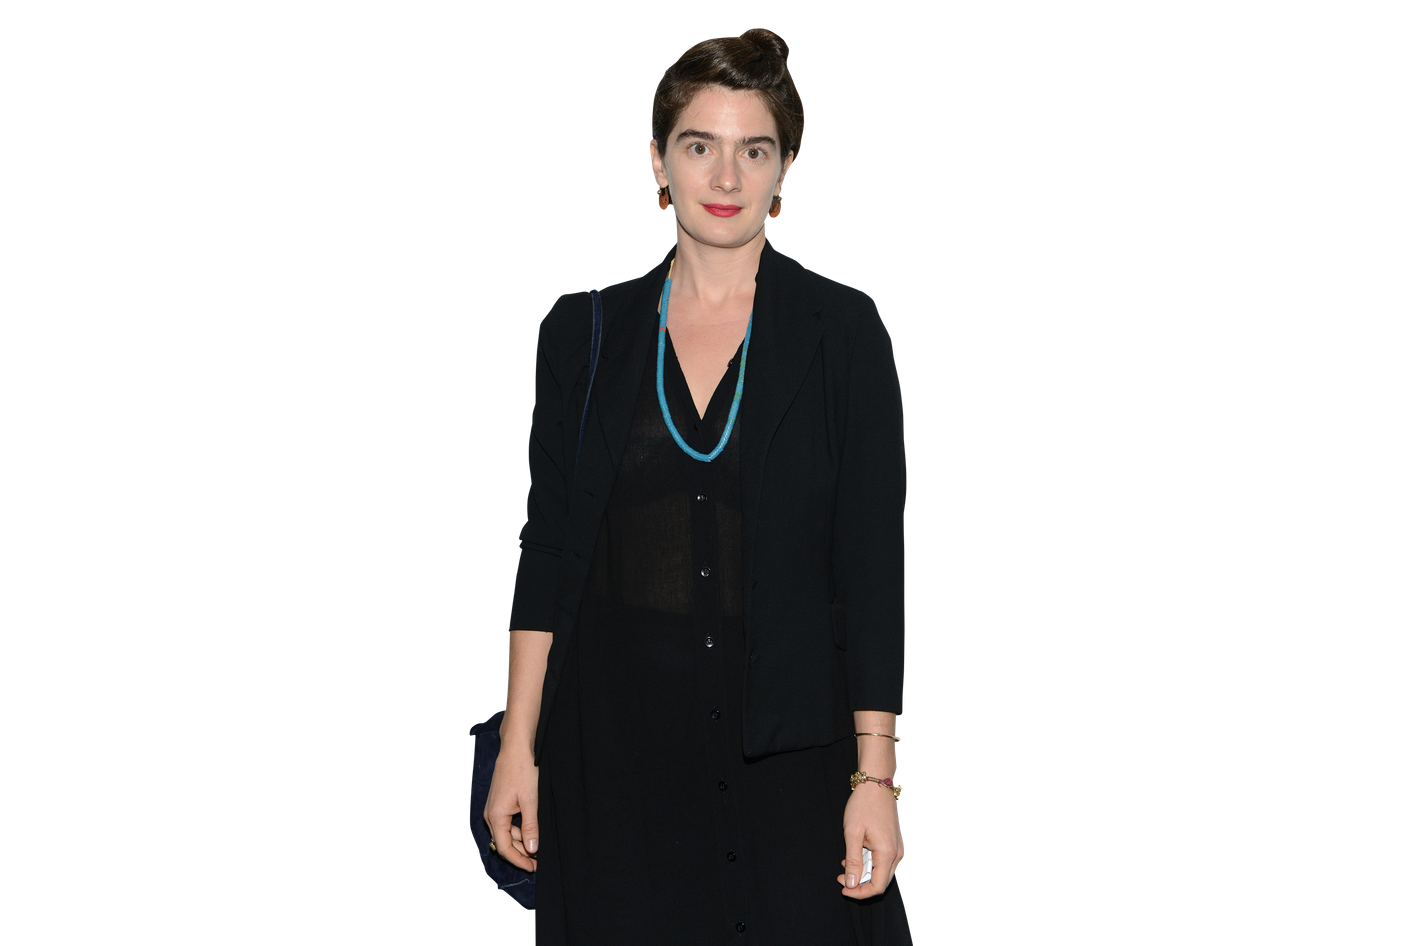 Gaby Hoffmann Profile - Gaby Hoffmann Hopes the Revolution Will be Televised